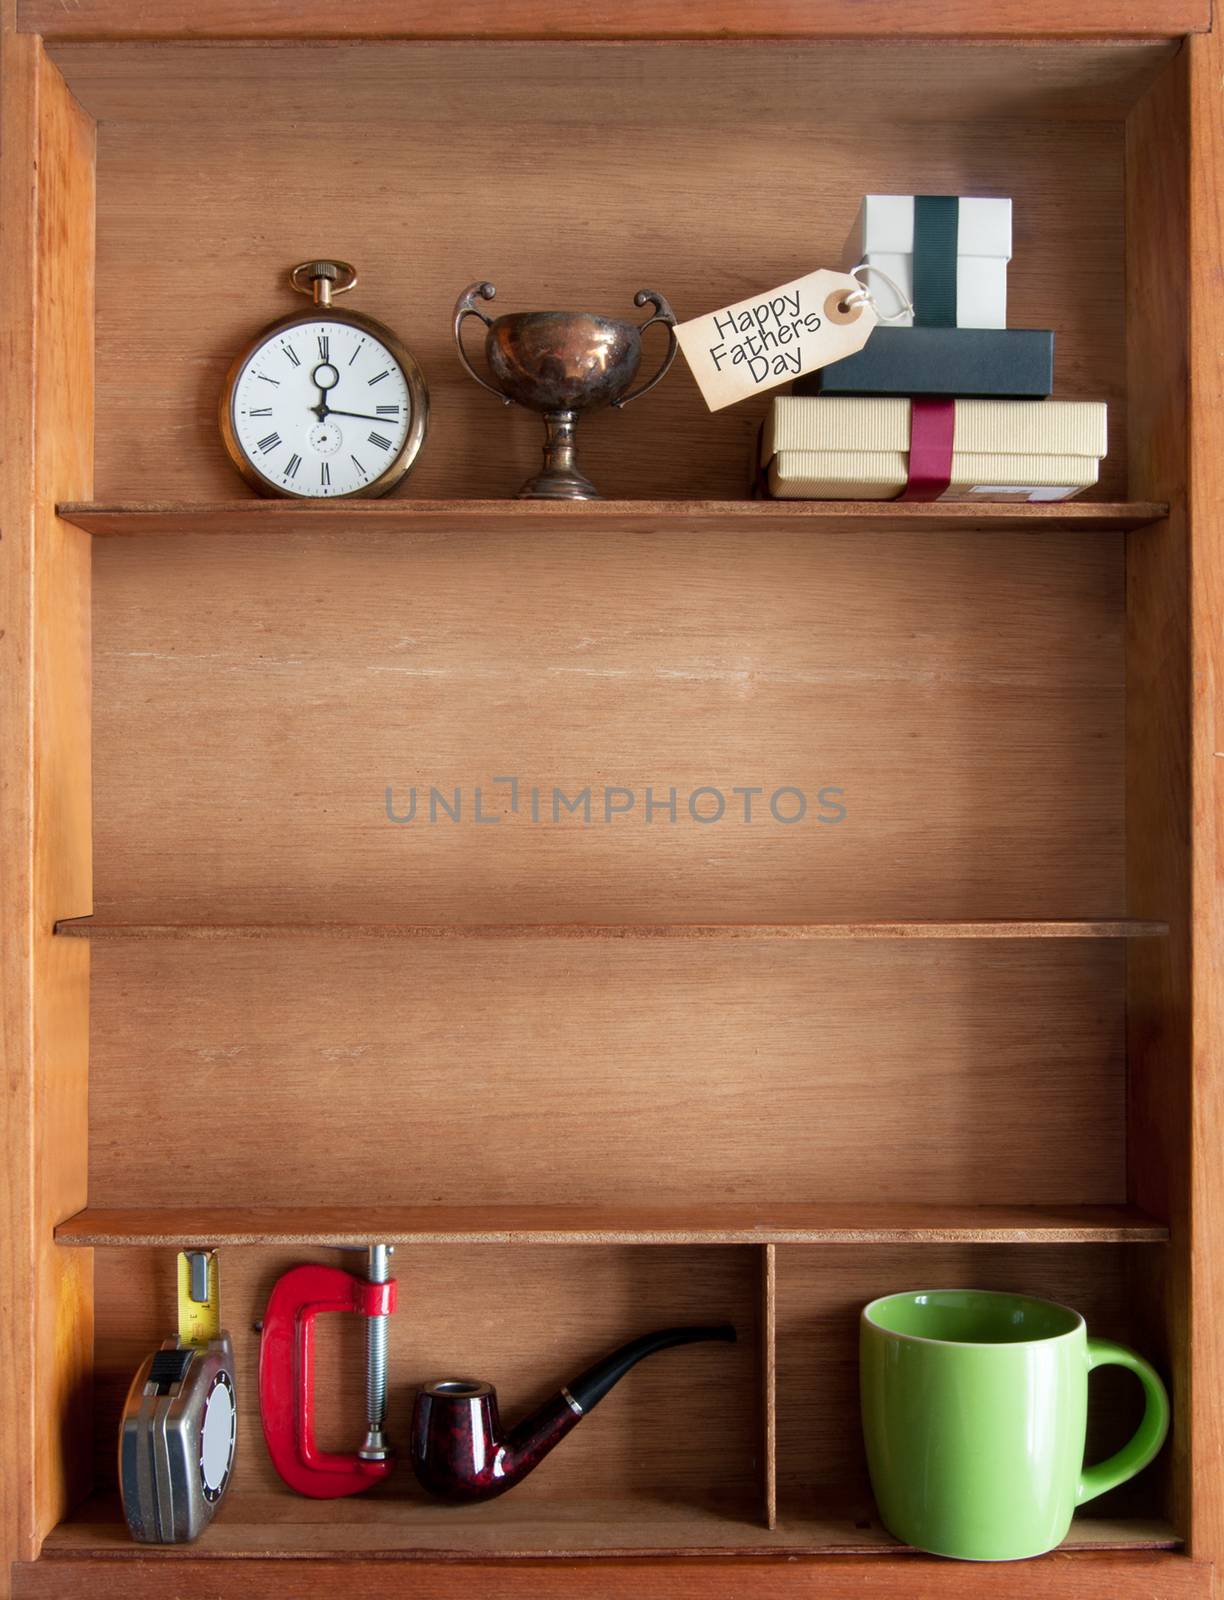 Fathers day gift with label inside a shelf with various objects including tools and coffee cup